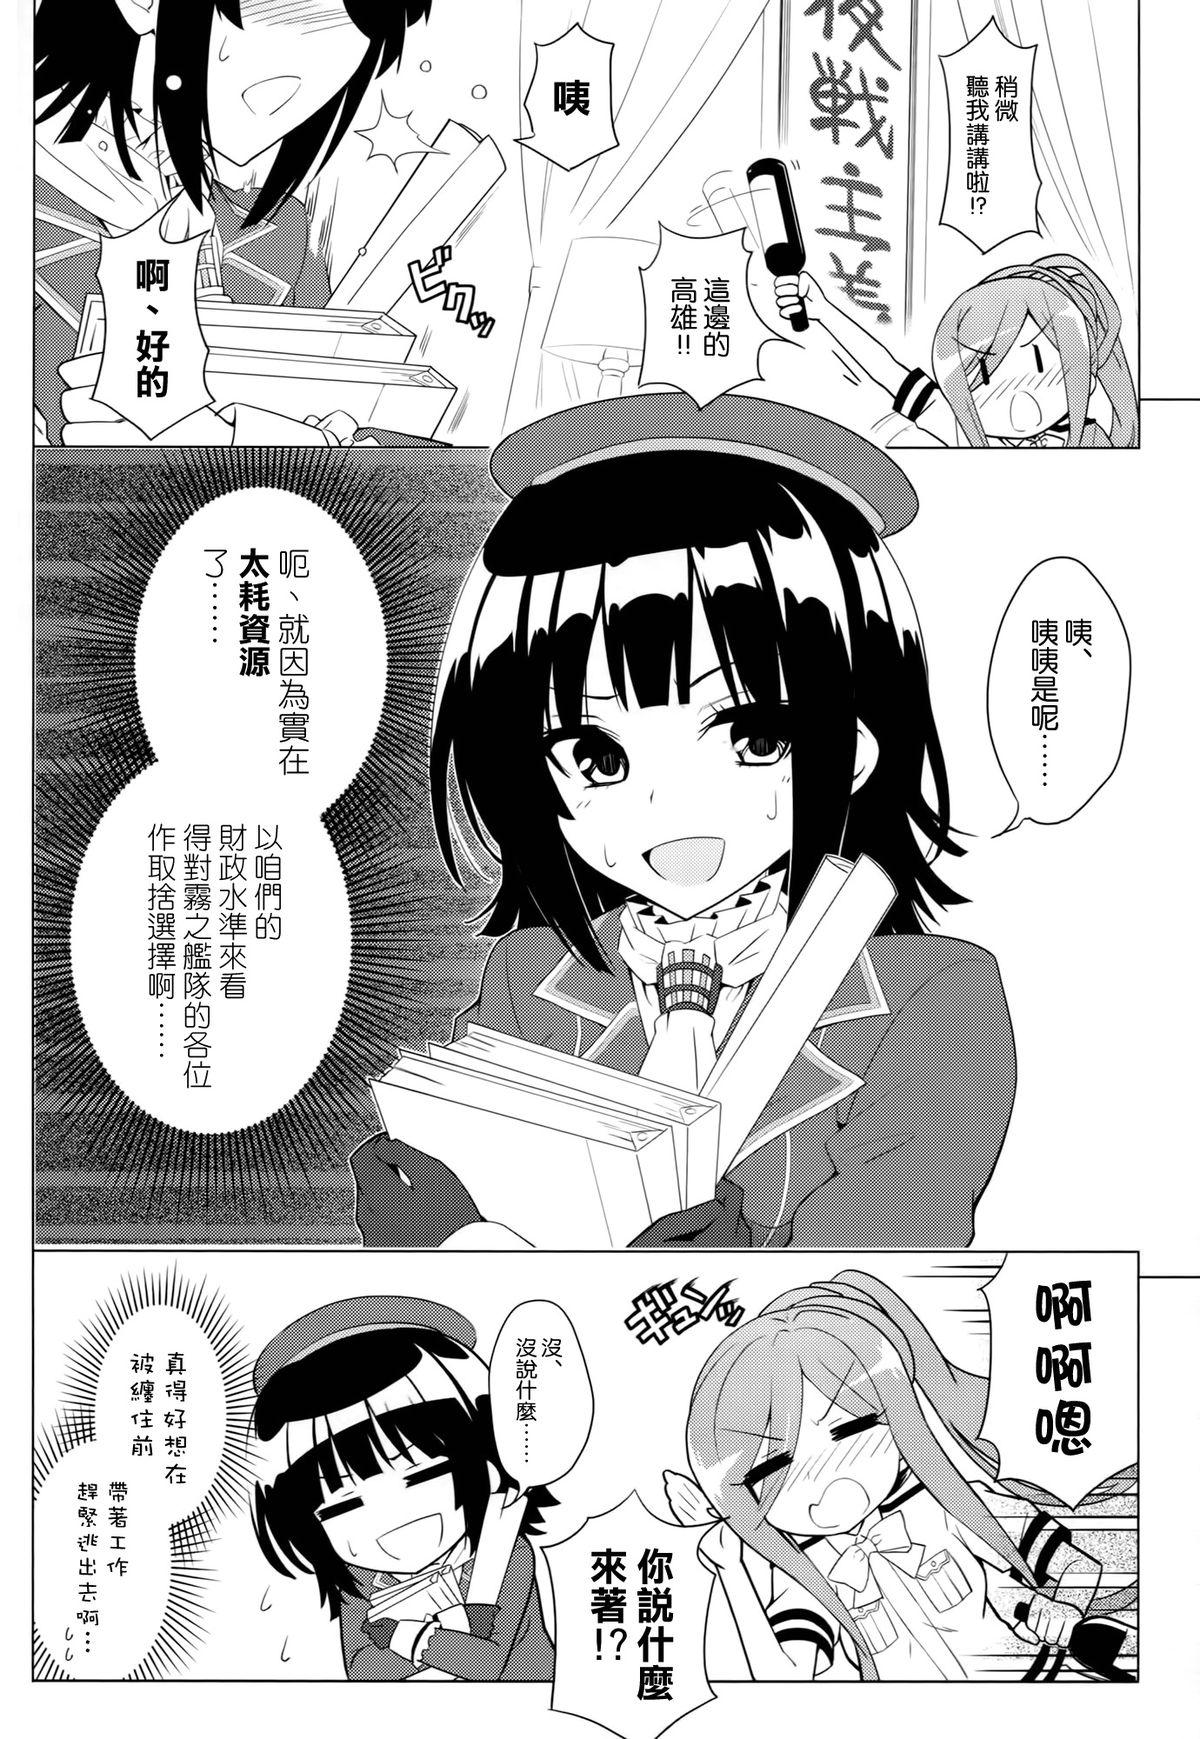 Camgirl Be United, Please!! Extra Operation ☆ - Kantai collection Arpeggio of blue steel Master - Page 7